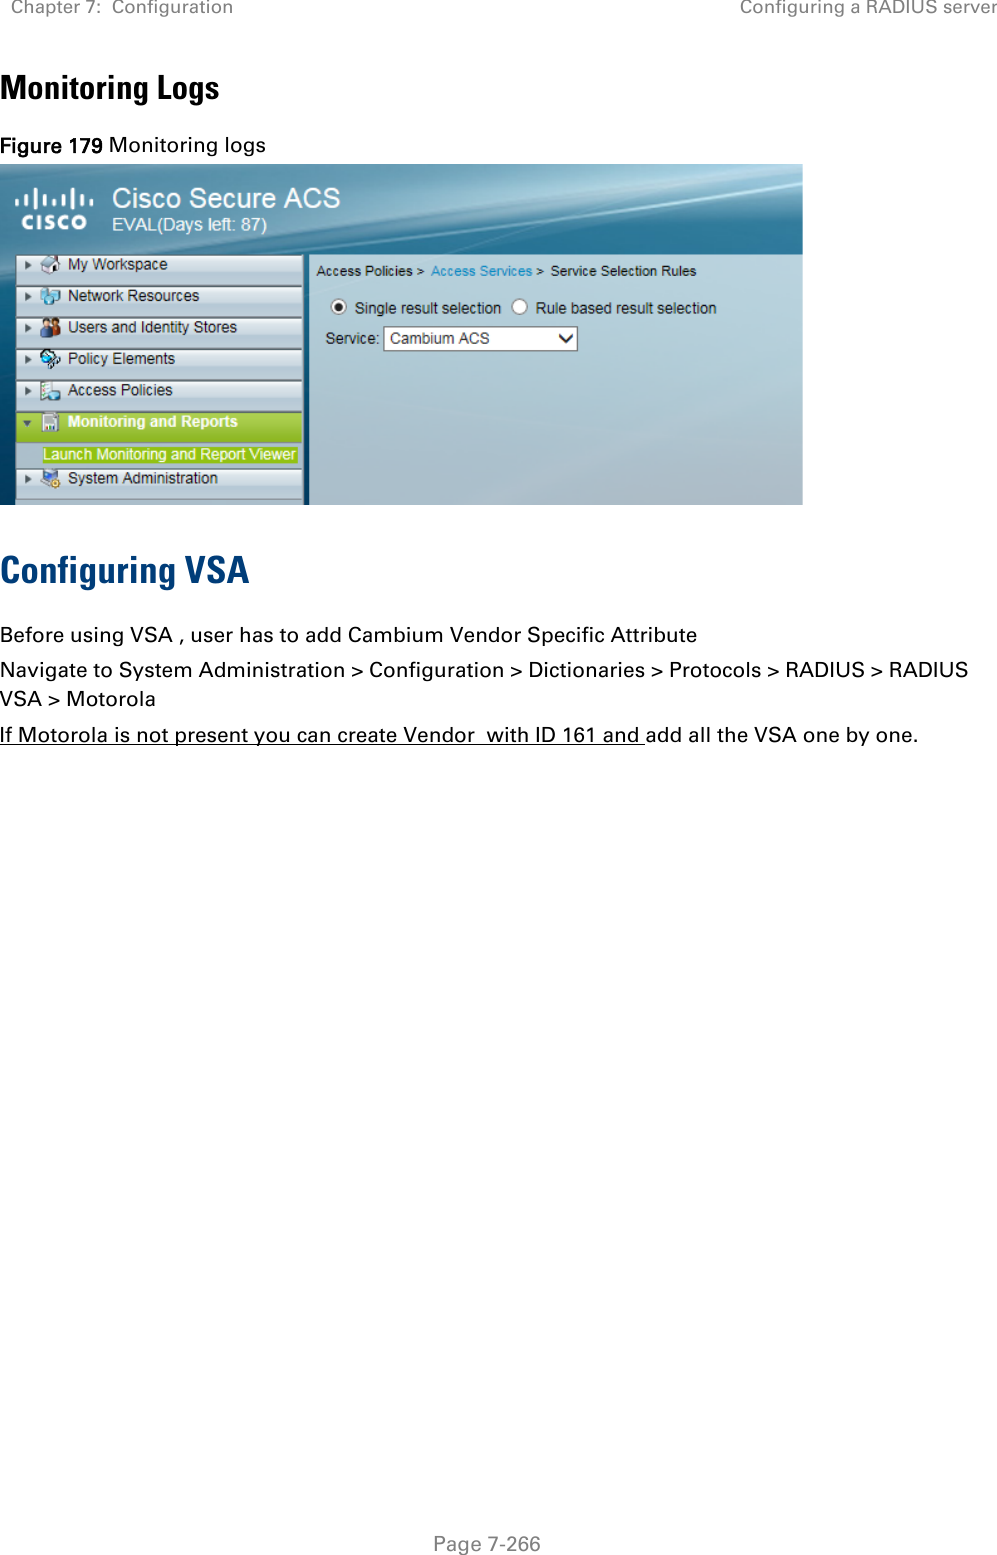 Chapter 7:  Configuration Configuring a RADIUS server   Page 7-266 Monitoring Logs Figure 179 Monitoring logs  Configuring VSA Before using VSA , user has to add Cambium Vendor Specific Attribute Navigate to System Administration &gt; Configuration &gt; Dictionaries &gt; Protocols &gt; RADIUS &gt; RADIUS VSA &gt; Motorola If Motorola is not present you can create Vendor  with ID 161 and add all the VSA one by one.   